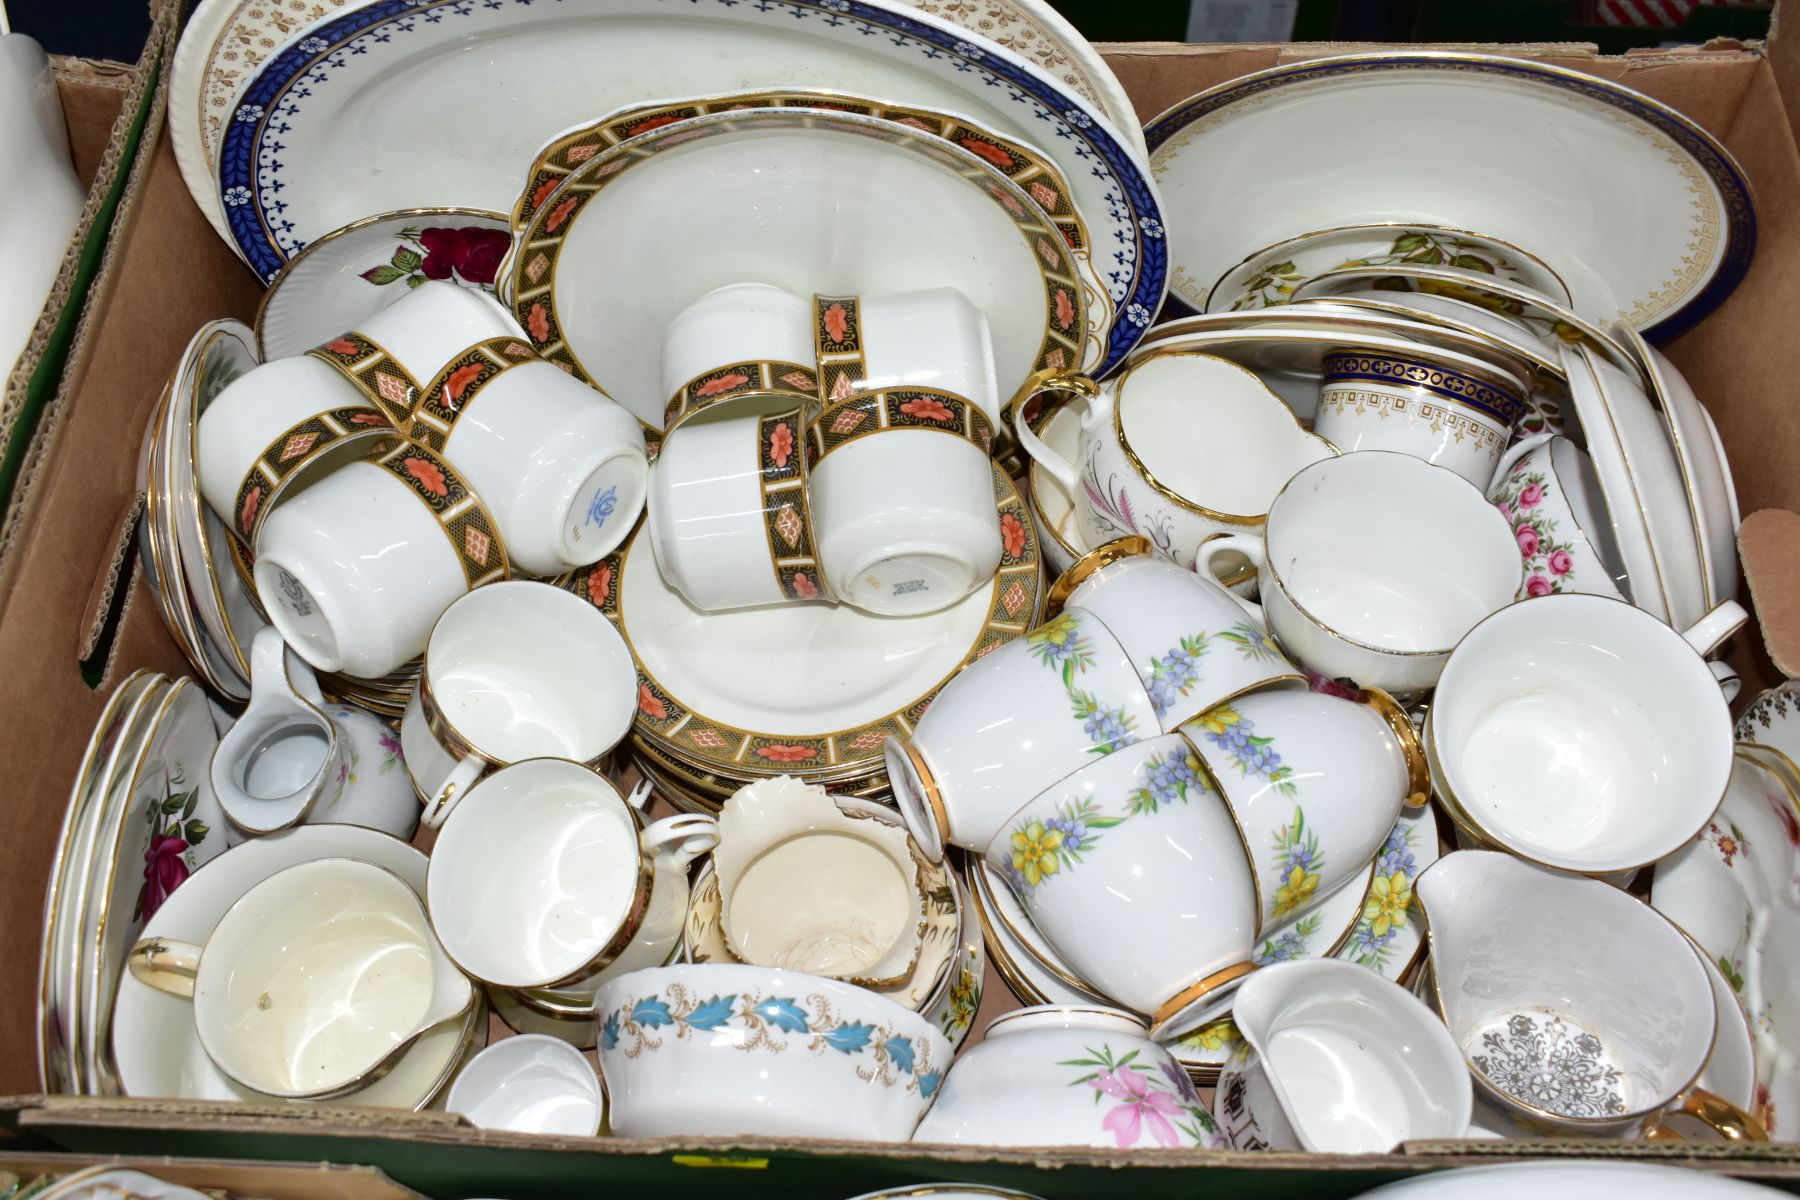 FIVE BOXES OF ASSORTED CERAMICS, mostly mid-20th century part tea sets by Tuscan, Colclough, Royal - Image 5 of 6